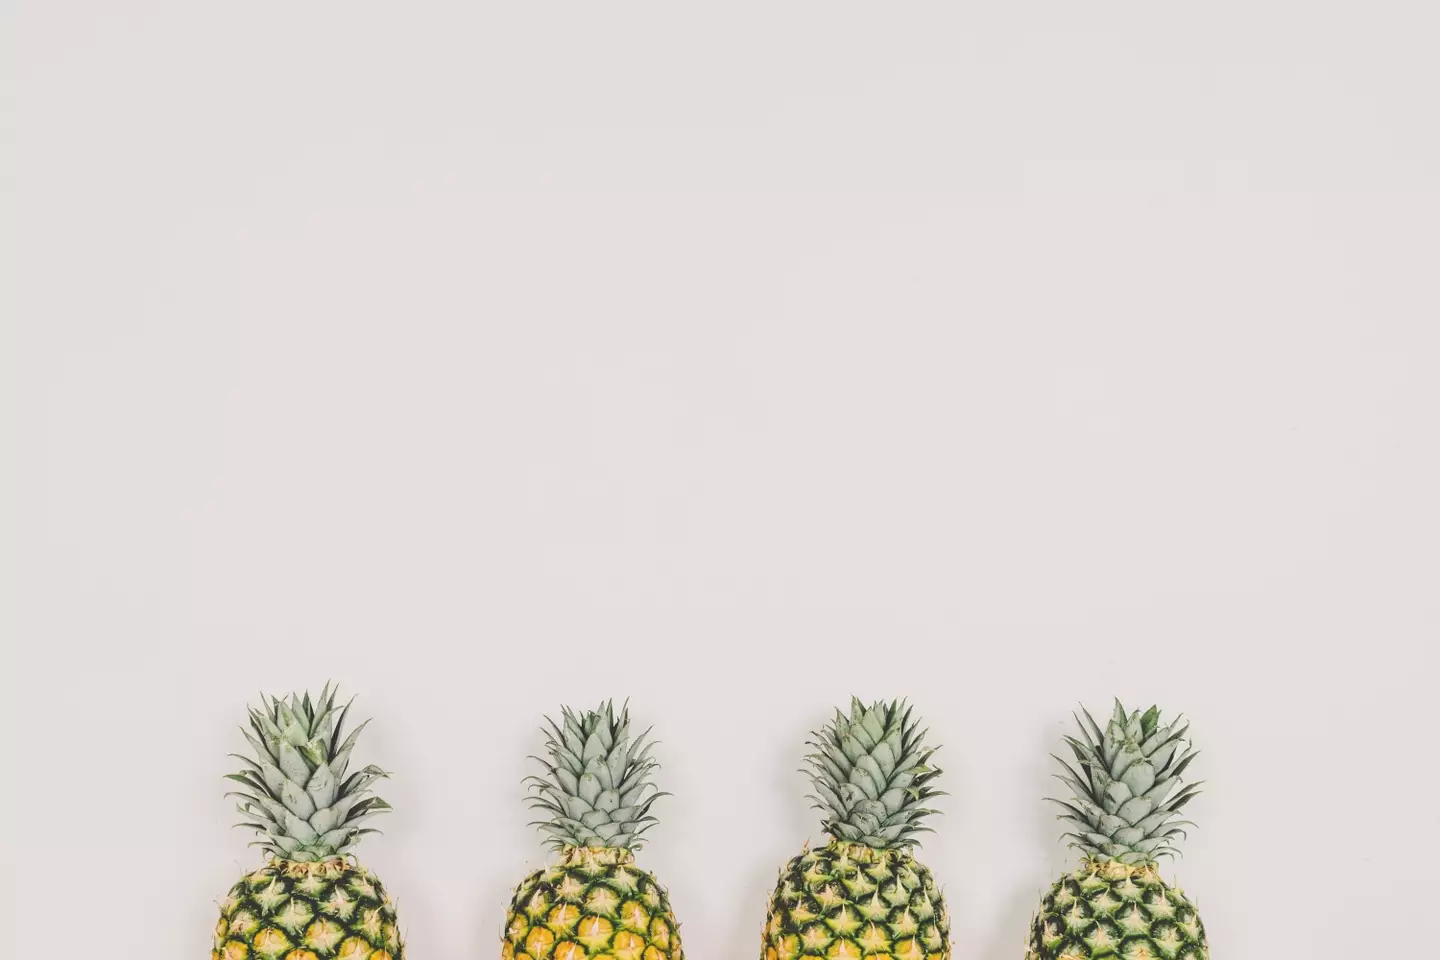 One symbol that is often attributed to swingers is a pineapple.